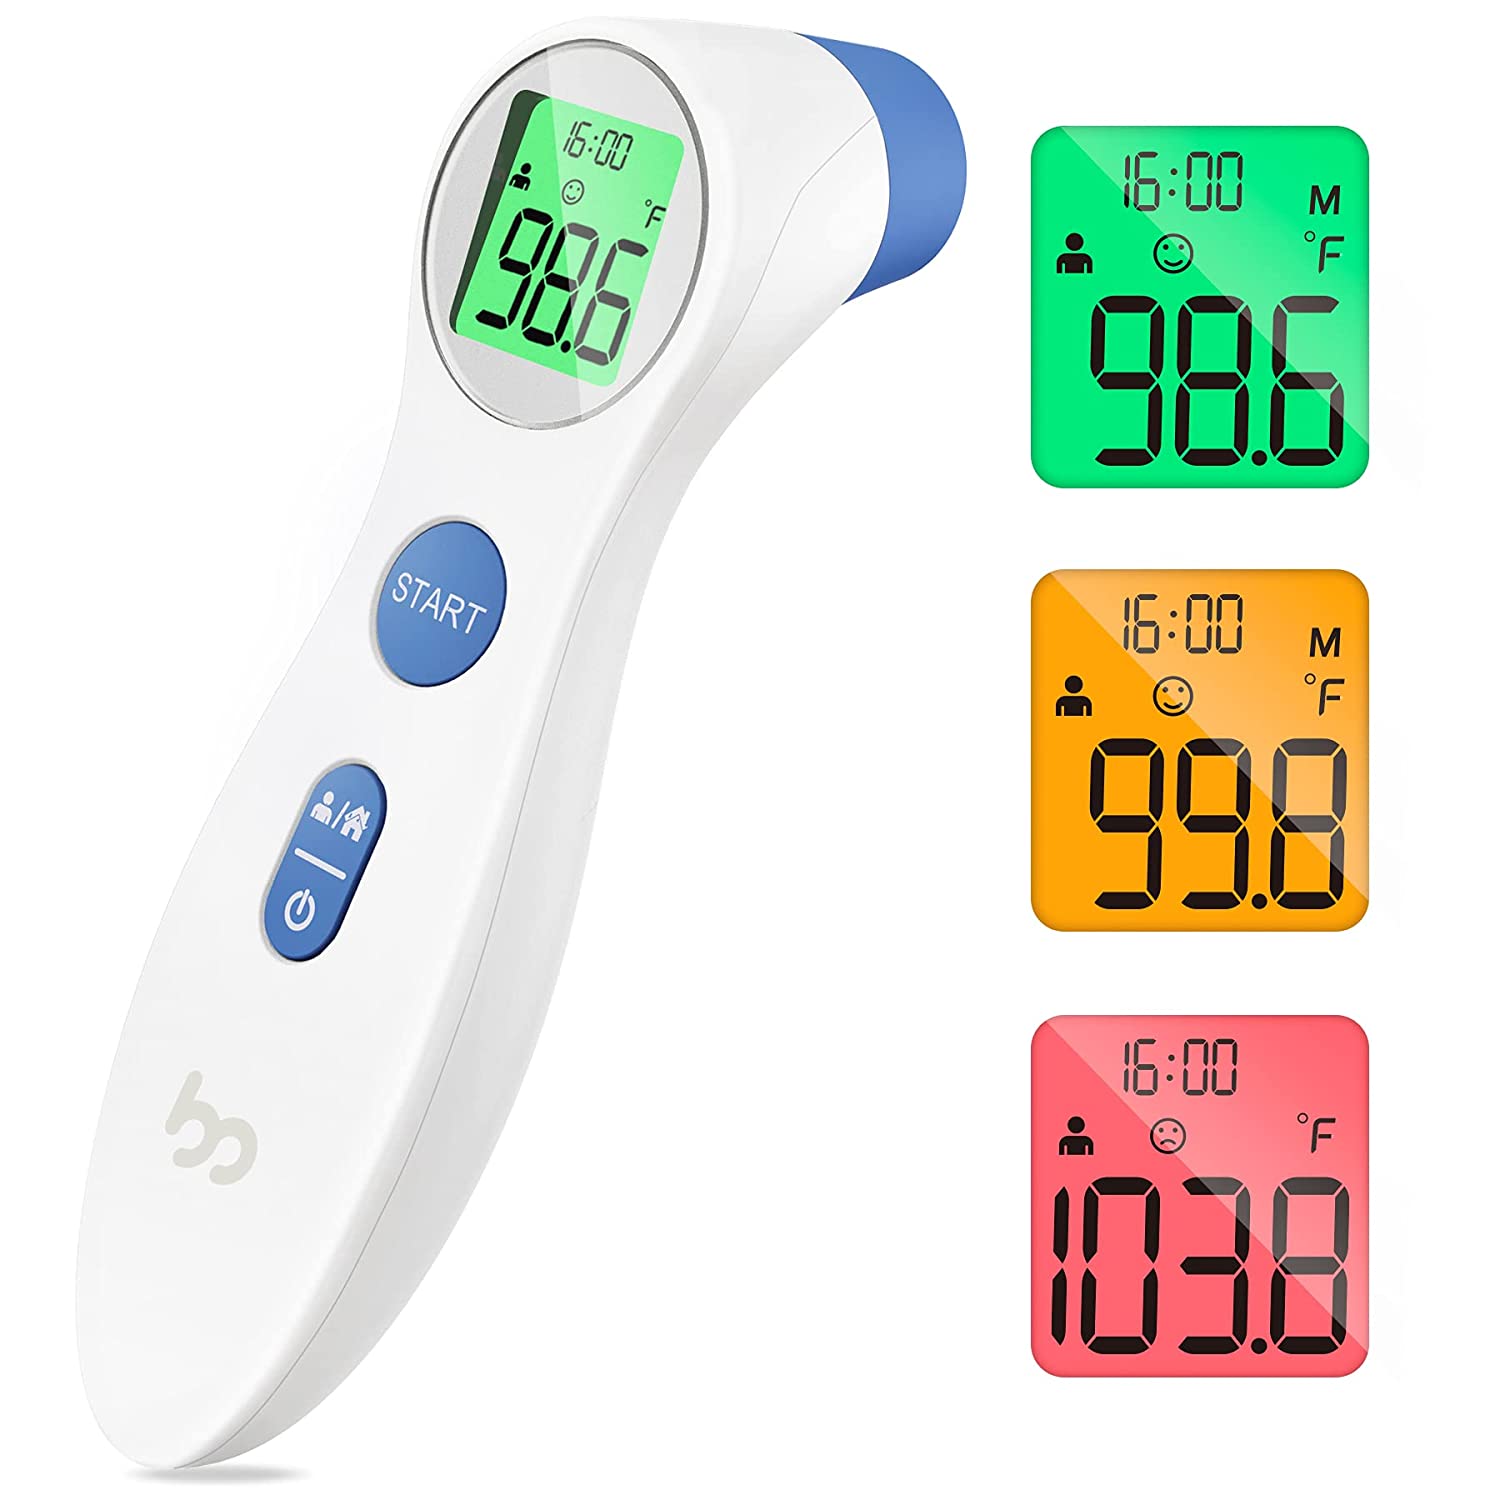 Touchless Forehead Thermometer for Adults&Kids for $16.99